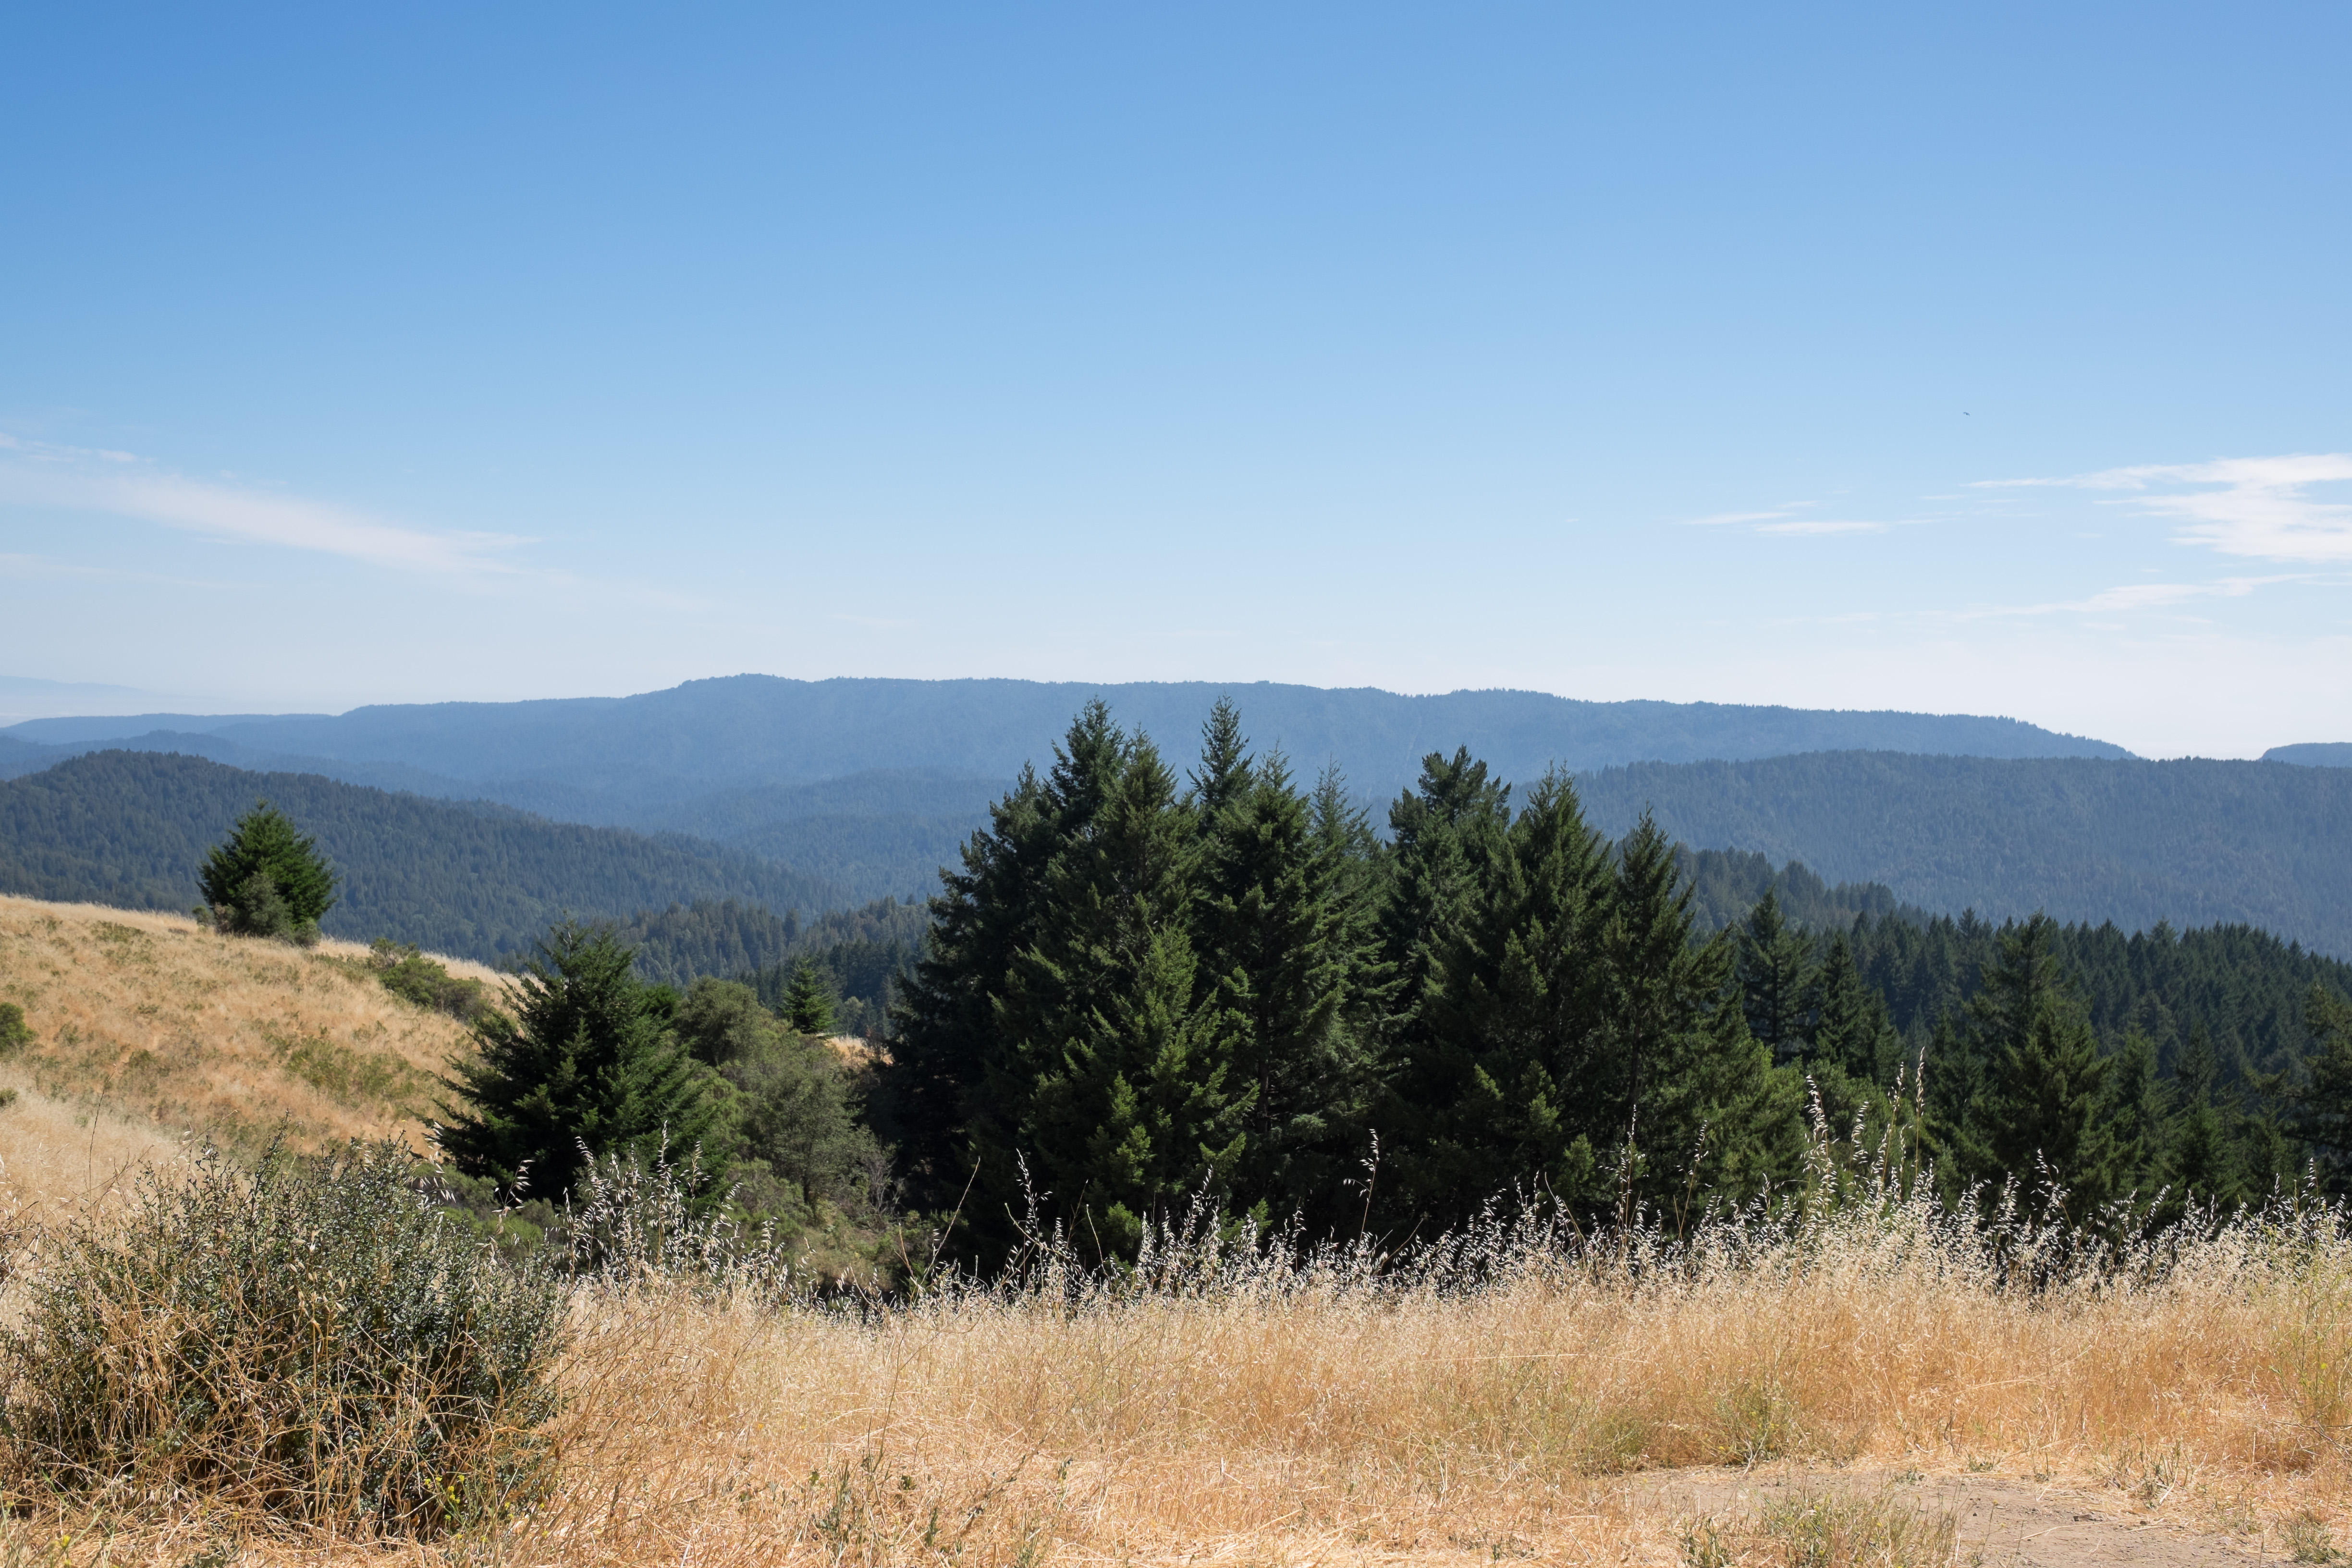 The northern California landscape of San Mateo County